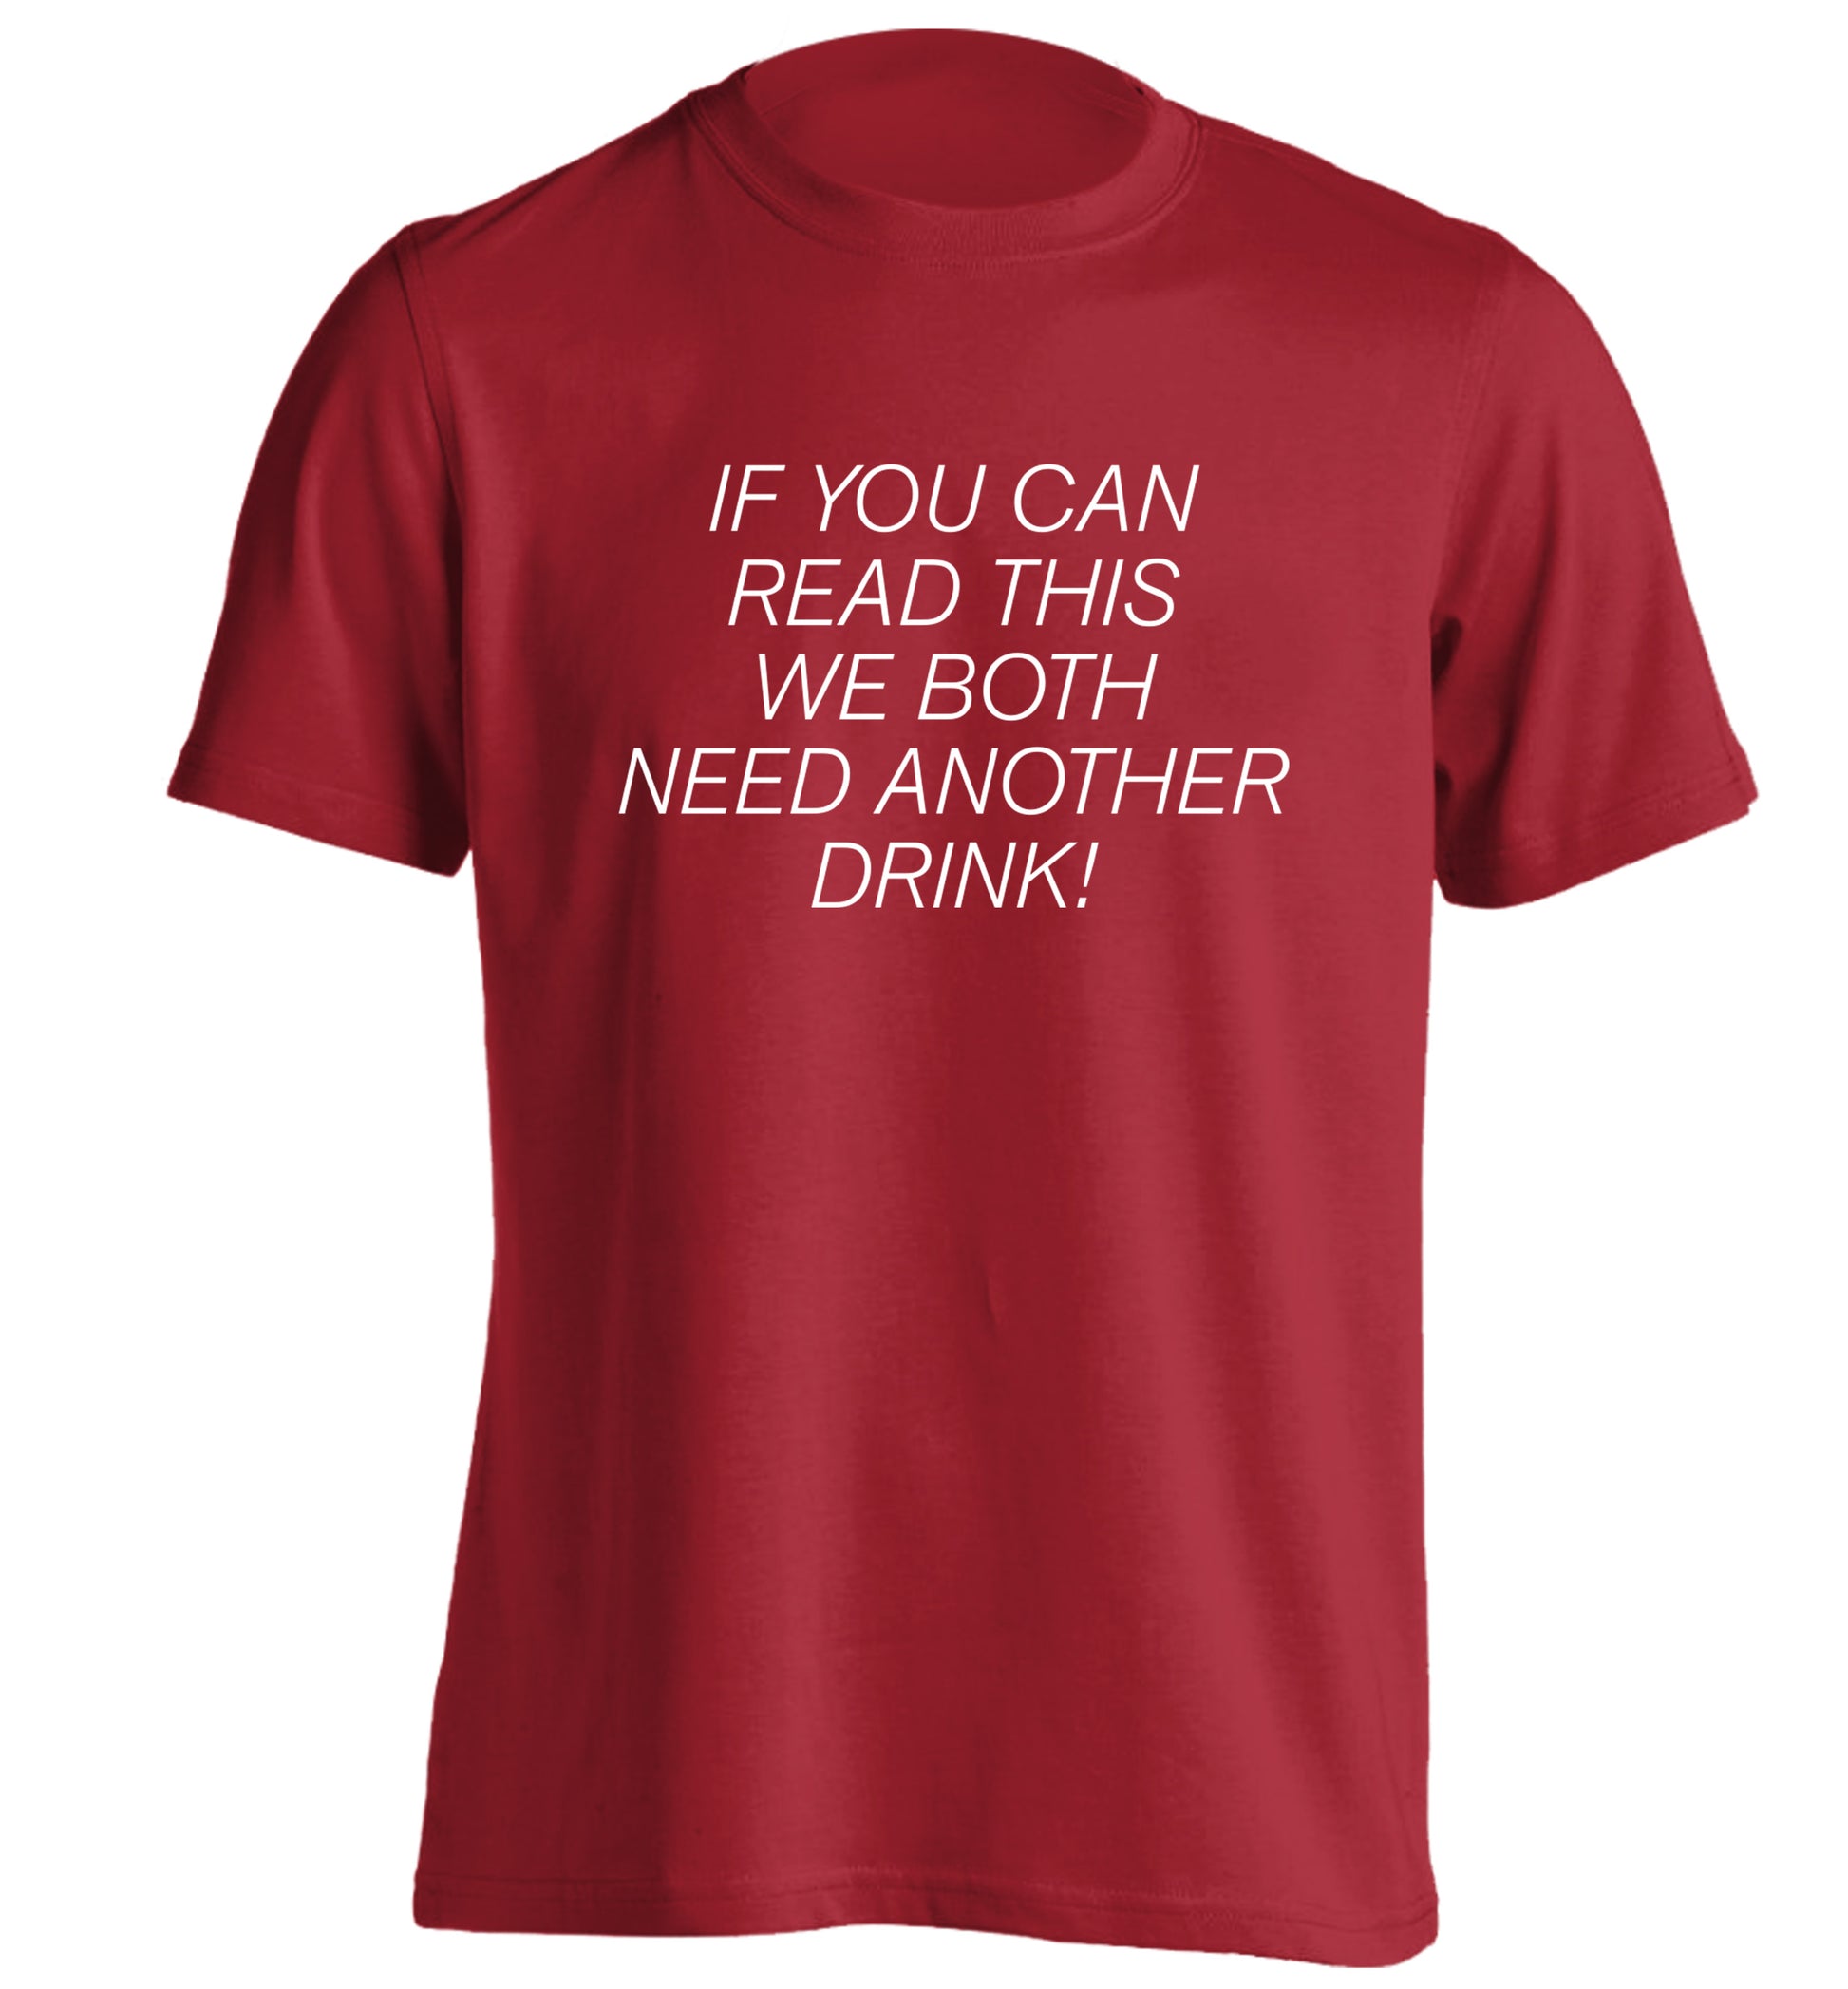 If you can read this we both need another drink! adults unisex red Tshirt 2XL